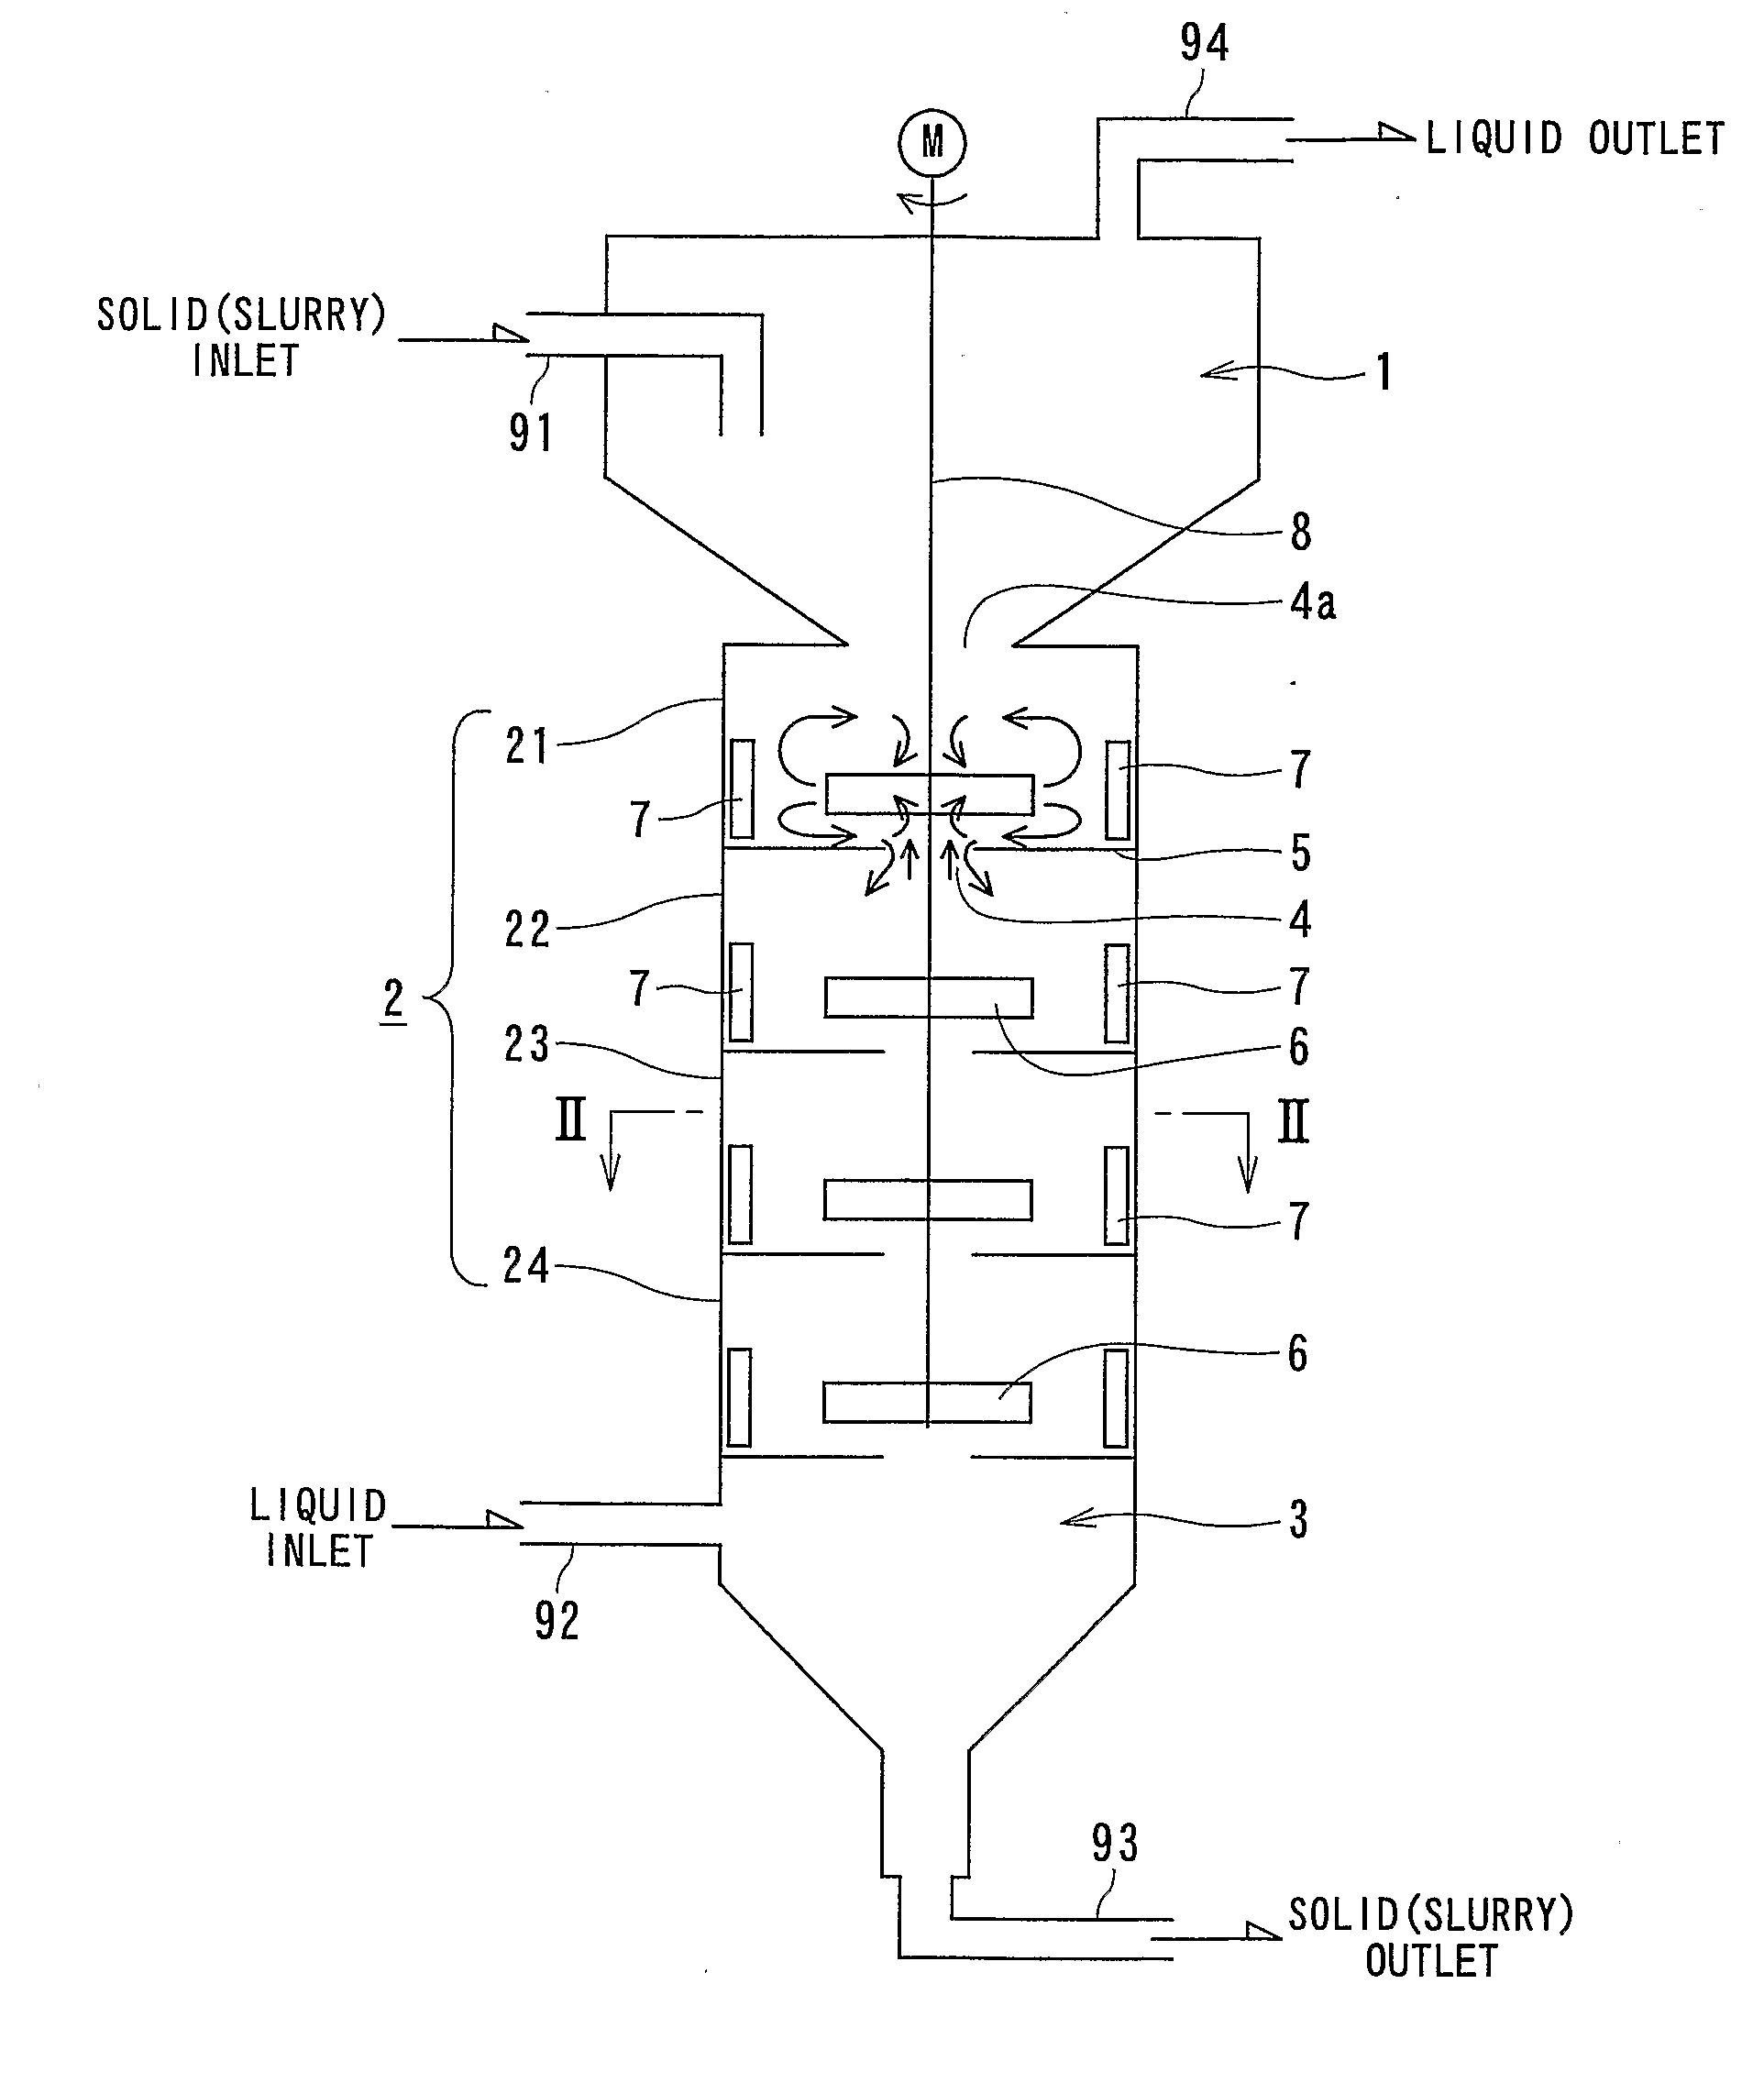 Apparatus and Method for Solid-Liquid Contact